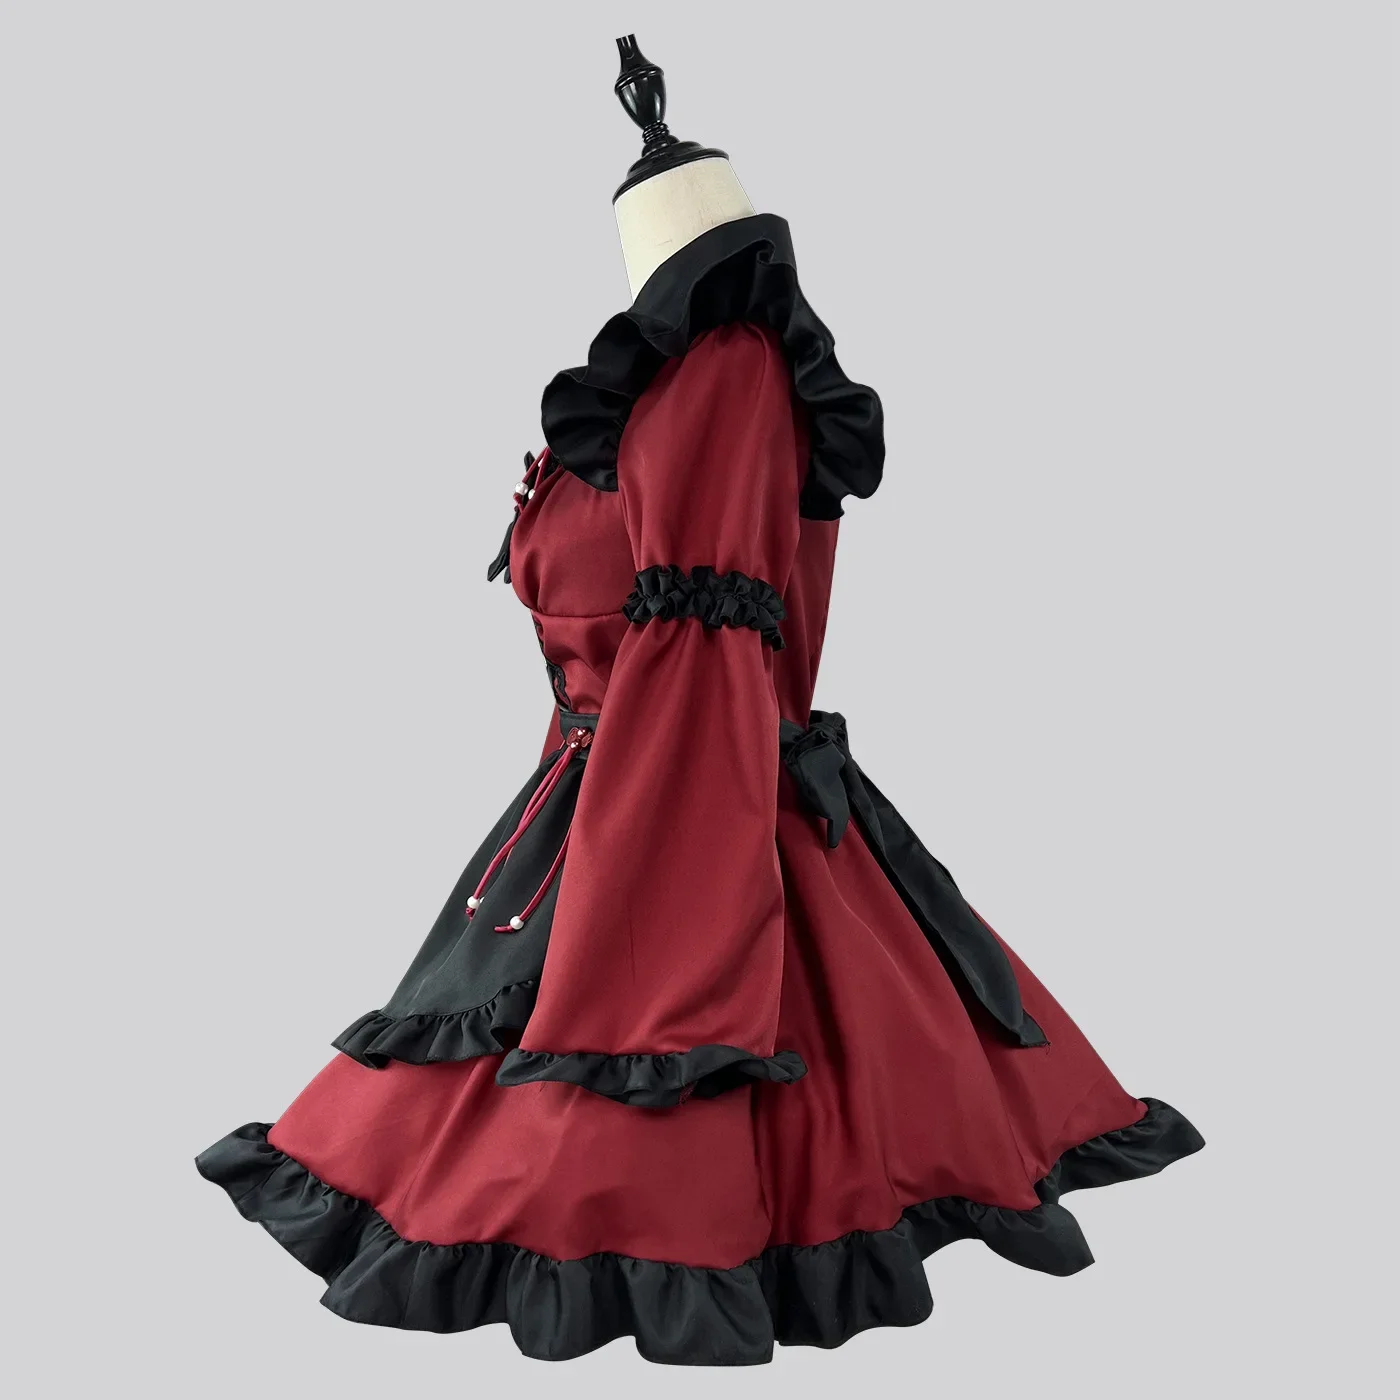 Anime Gothic Little Devil Lolita Maid Dress Cosplay Costume Red Girl Maid Dress Trending Girls Maid Party Costumes S -5XL